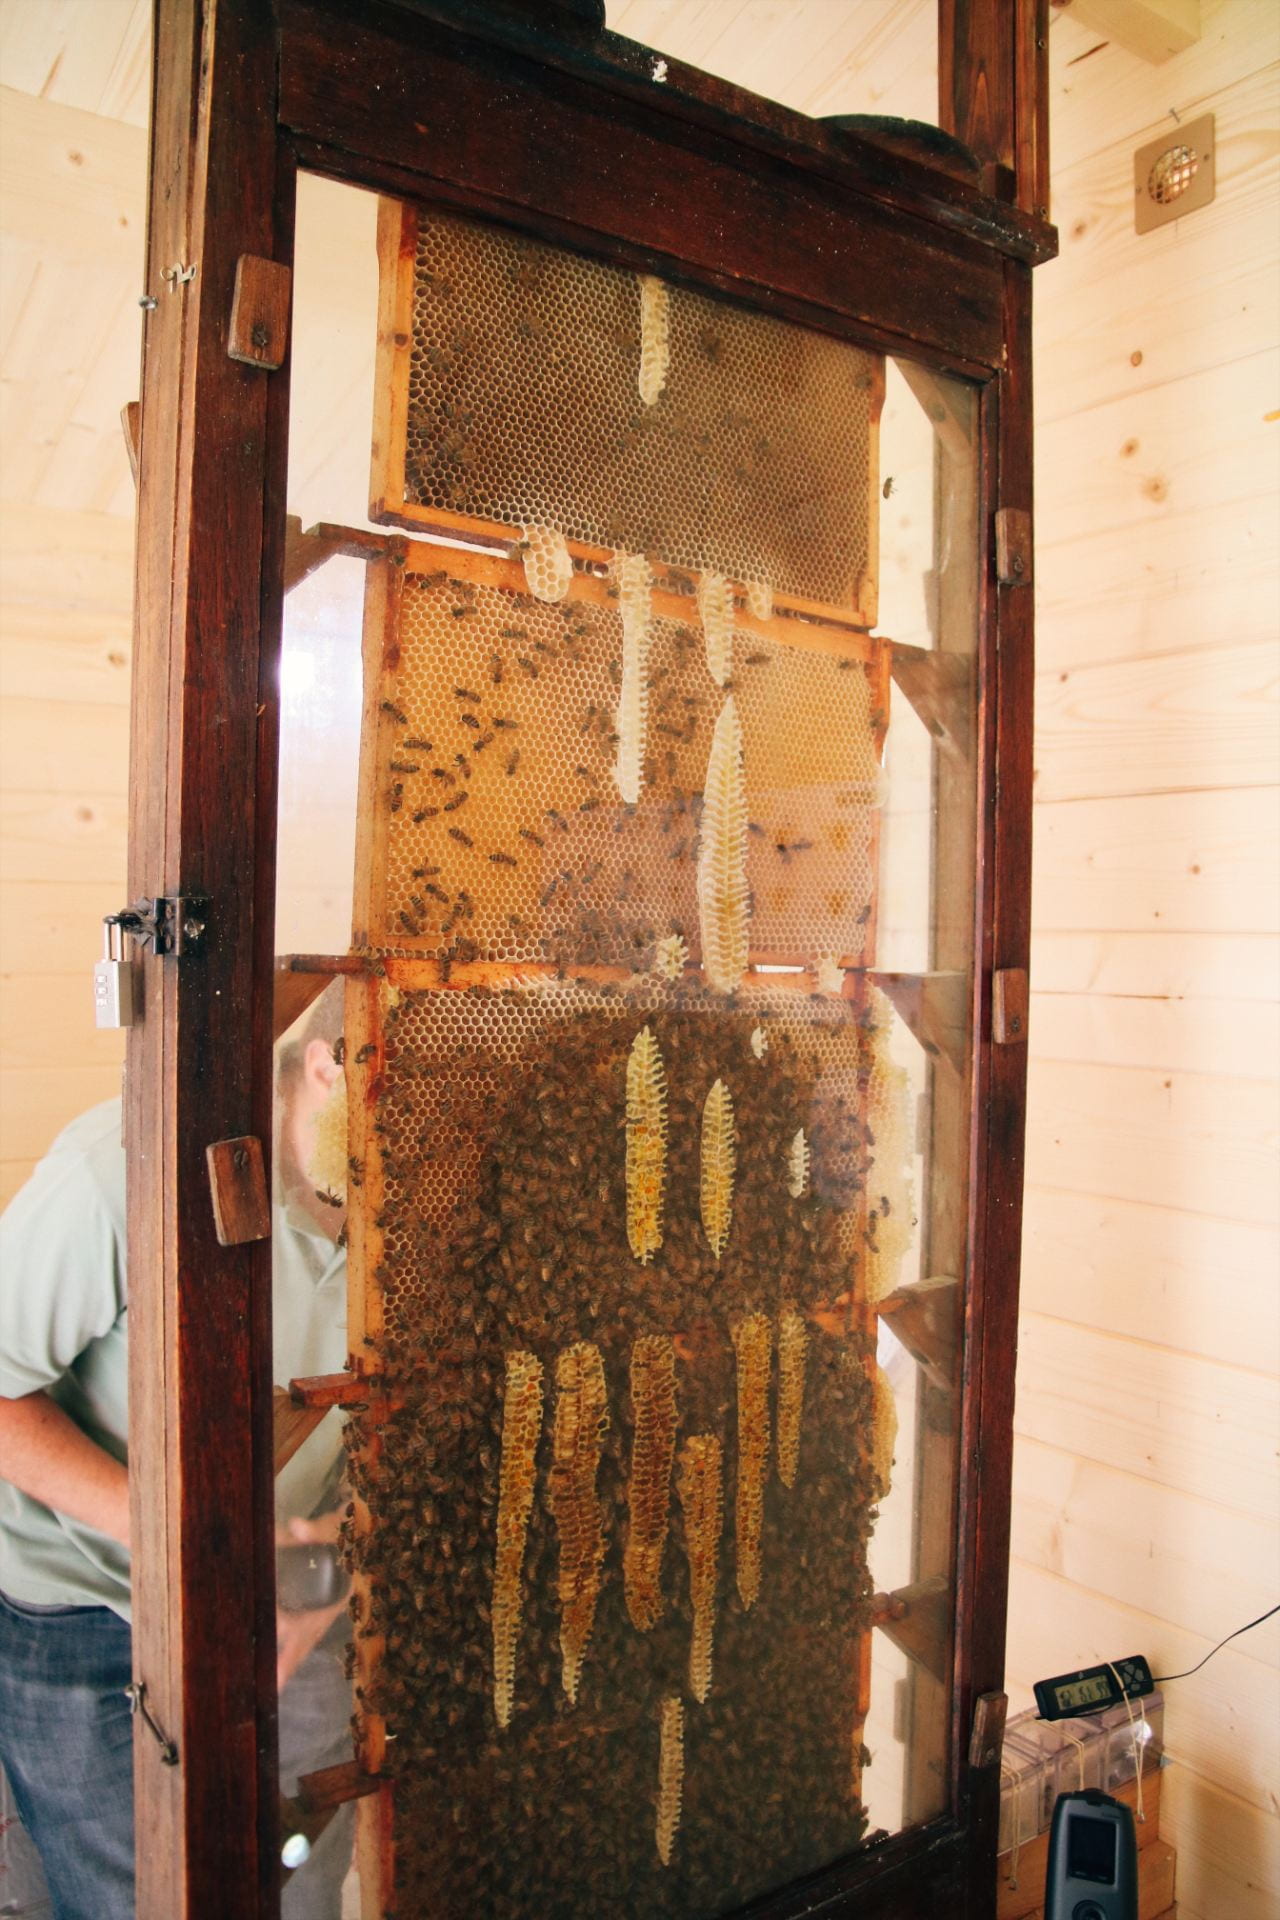 Image of a tall glass structure with honeycomb full of bees inside, a man stands safely behind it